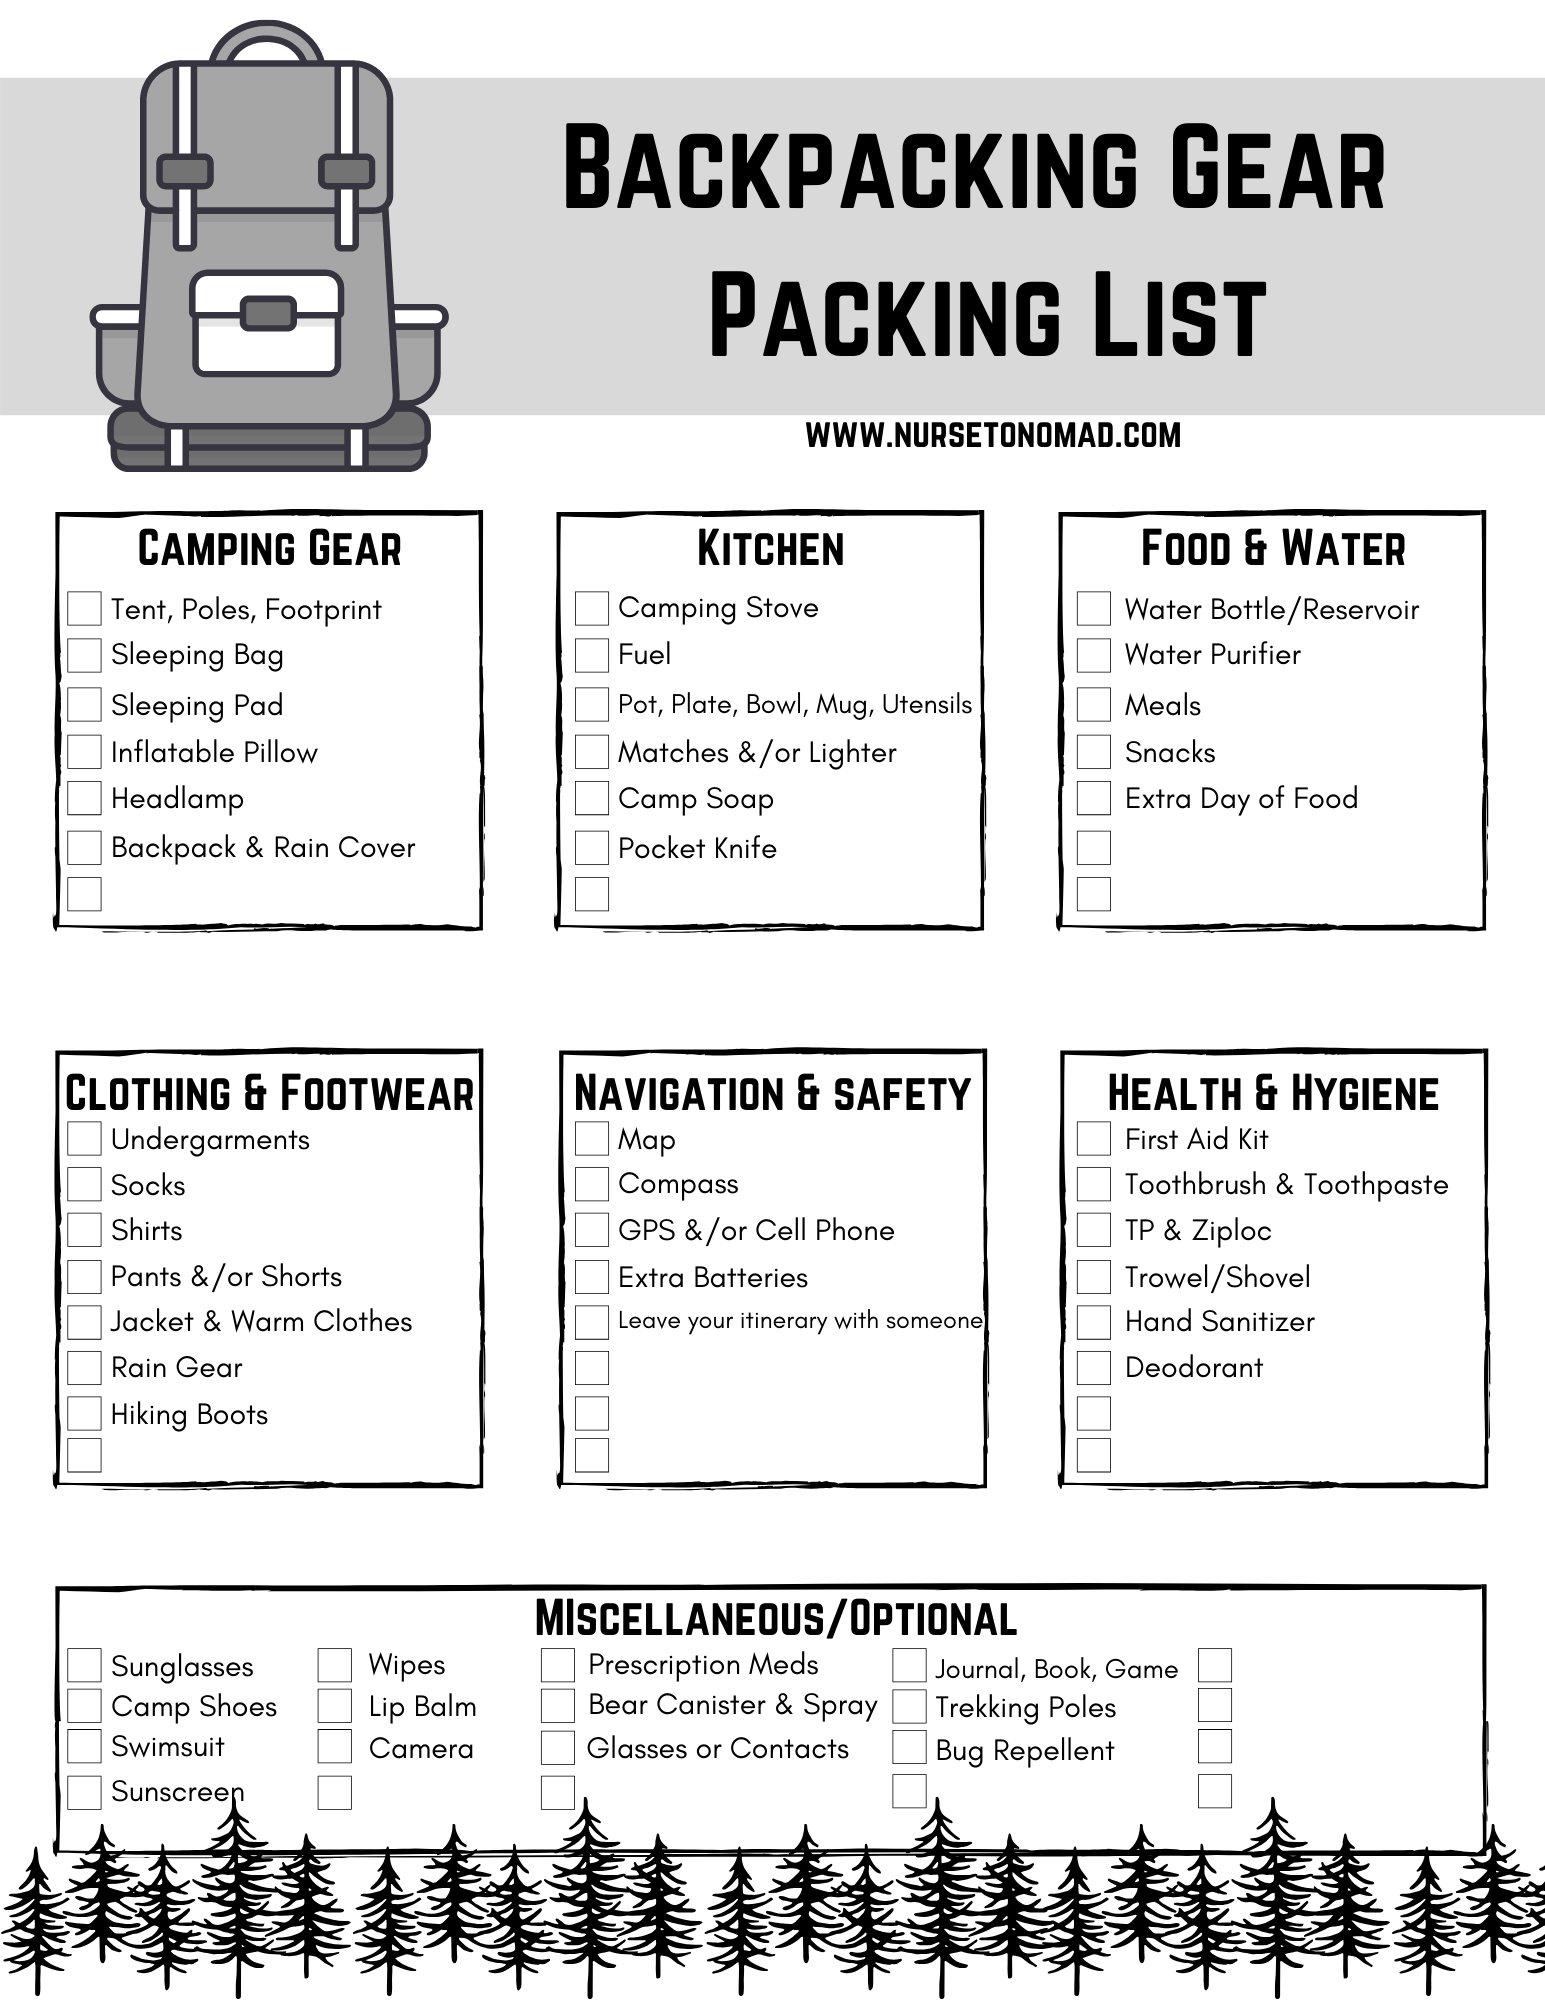 Backpacking Gear Packing List â¢ Nurse to Nomad